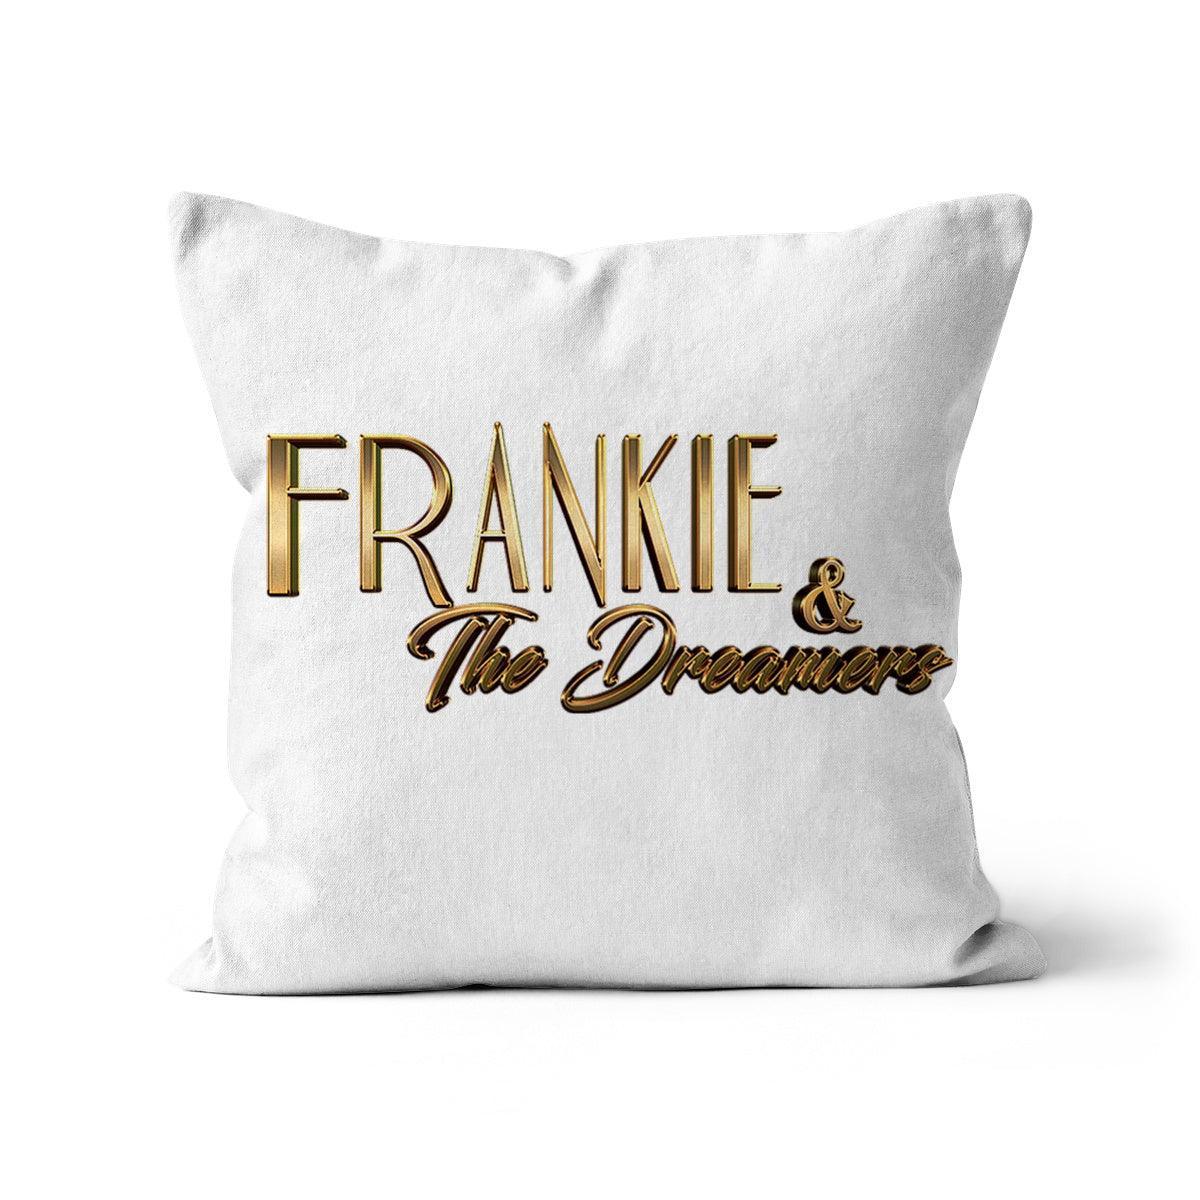 Frankie And The Dreamers Cushion | Homeware Canvas 12"x12"